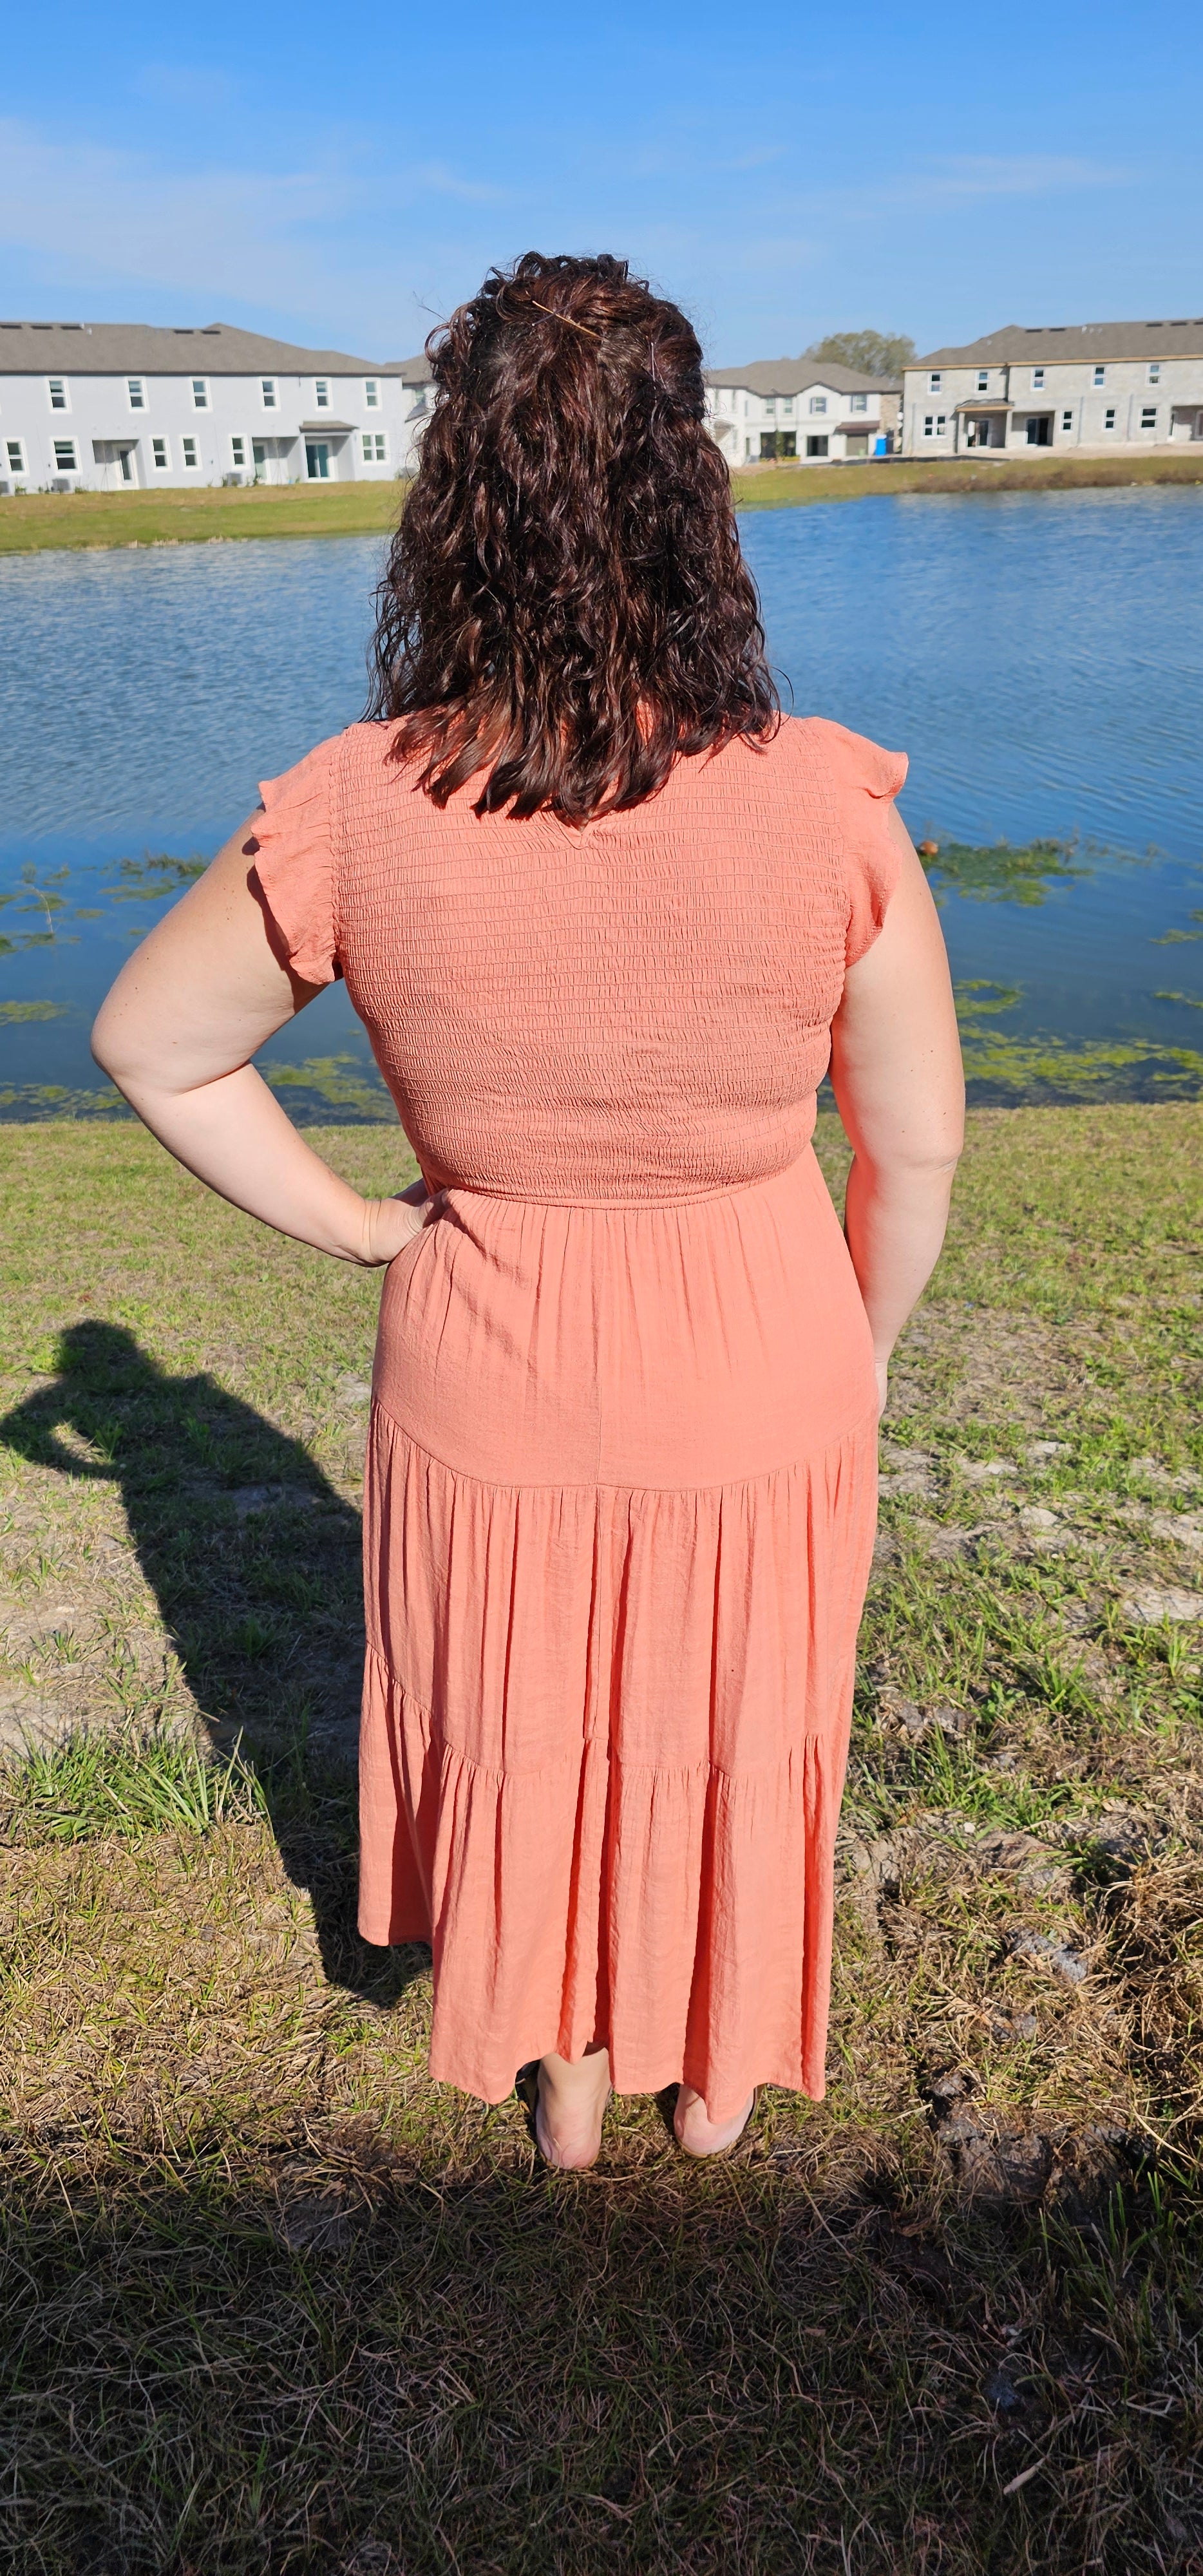 This dress is ready to charm your day away! Flattering round neckline, keyhole-secured back neck button, and fluttery short cap sleeves combine with smocked body and tiered skirt for an oh-so-sweet silhouette. You'll be saying 'till tomorrow' in this cozy, lined midi dress! Sizes small through large.